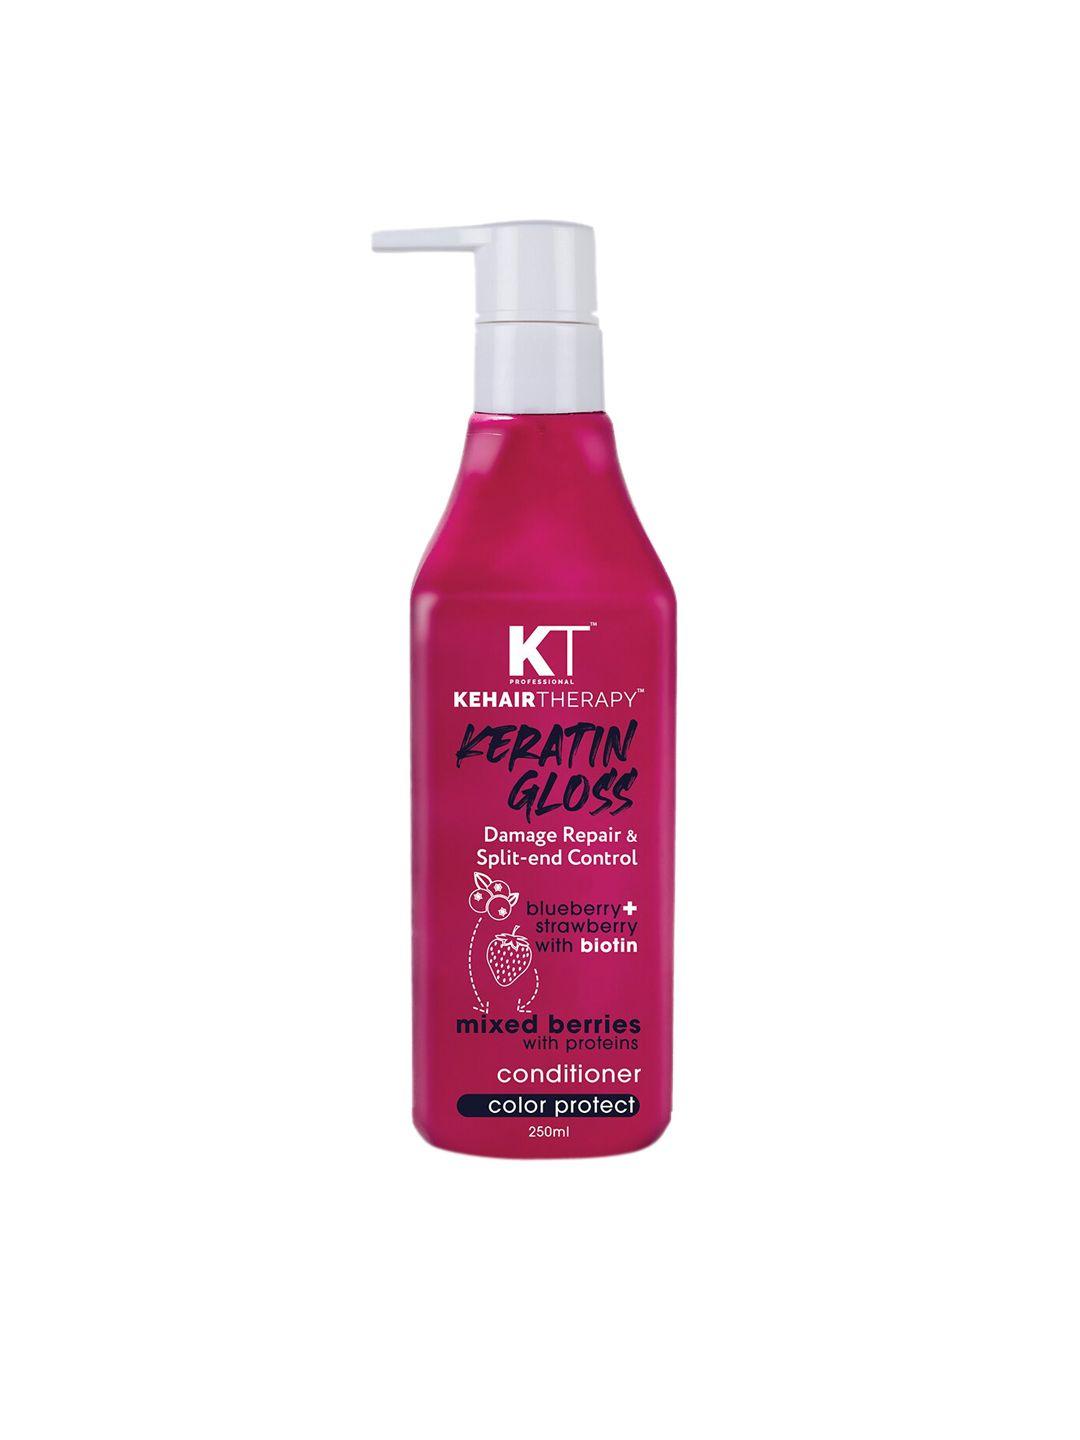 kehairtherapy professional keratin gloss damage repair & split end control conditioner